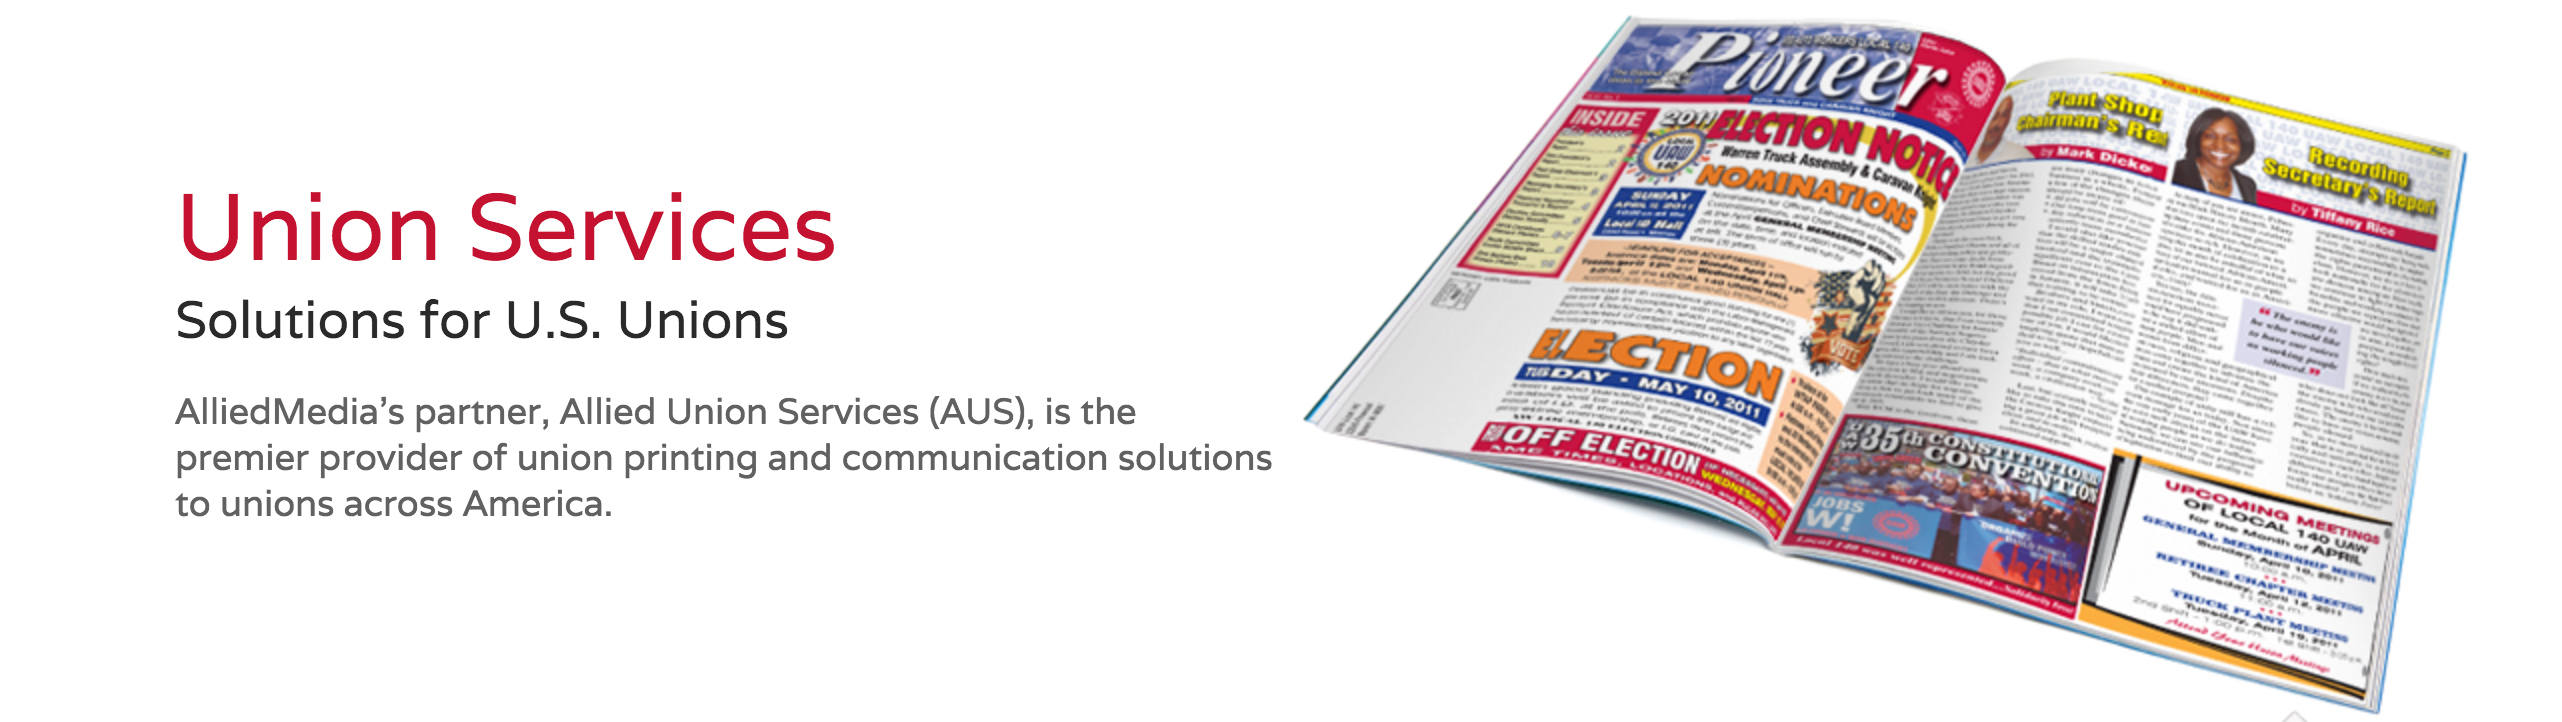 Allied Union Services is our union print provider